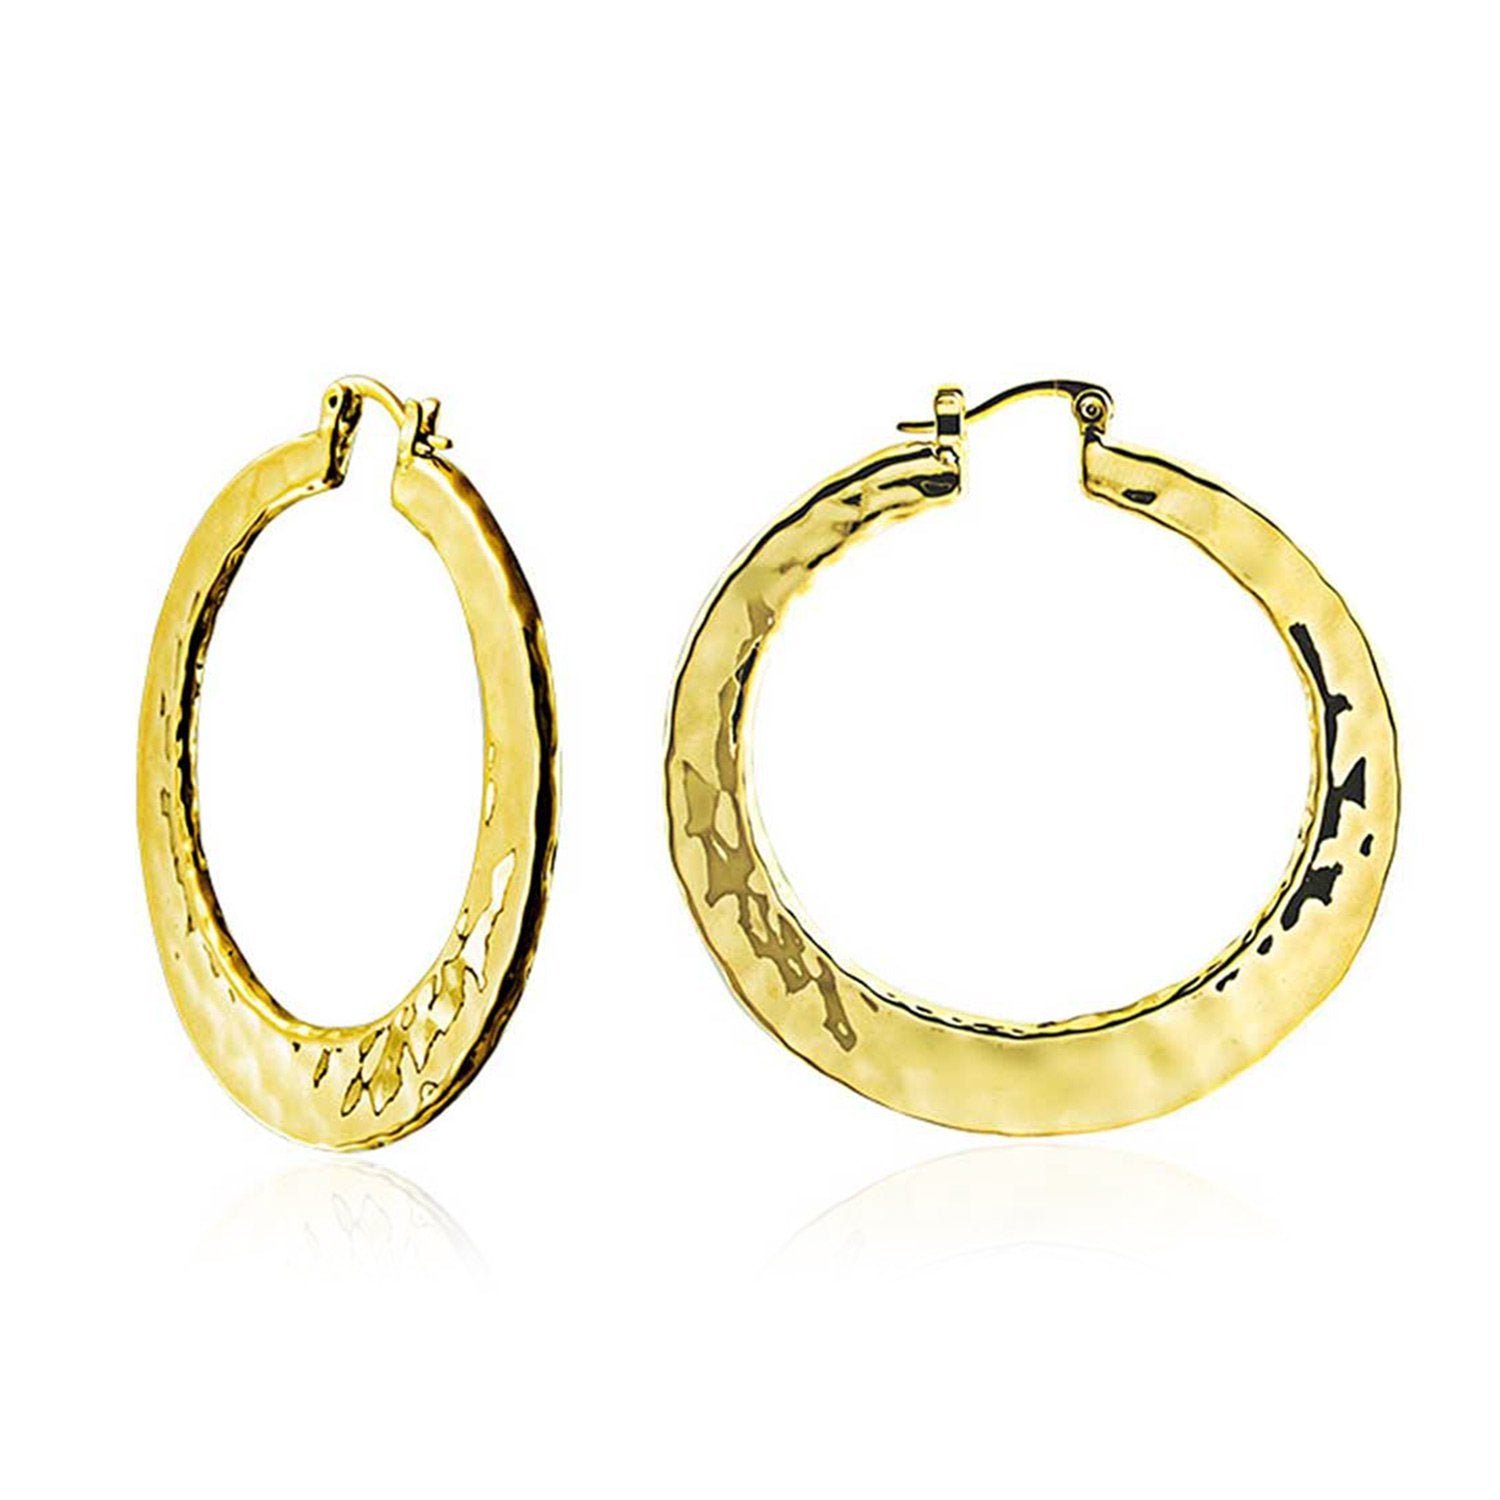 Boho Style Hammered Large Hoop Earrings Silver Gold Plated 2 Inch - Joyeria Lady